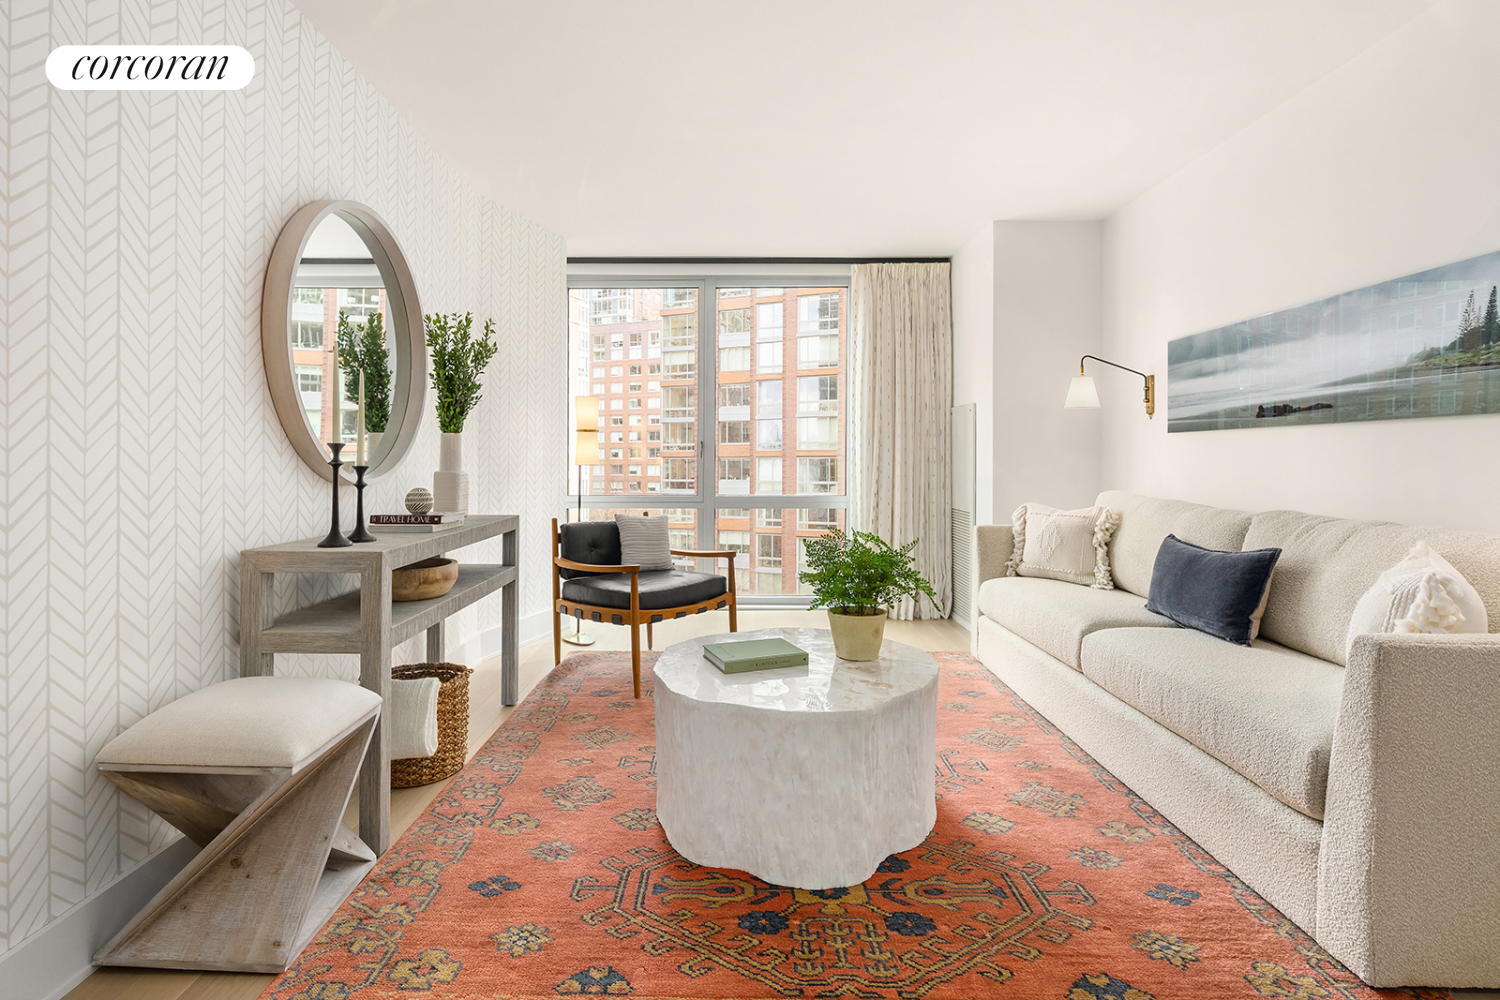 20 River Terrace 17D, Battery Park City, Downtown, NYC - 1 Bedrooms  
1 Bathrooms  
3 Rooms - 